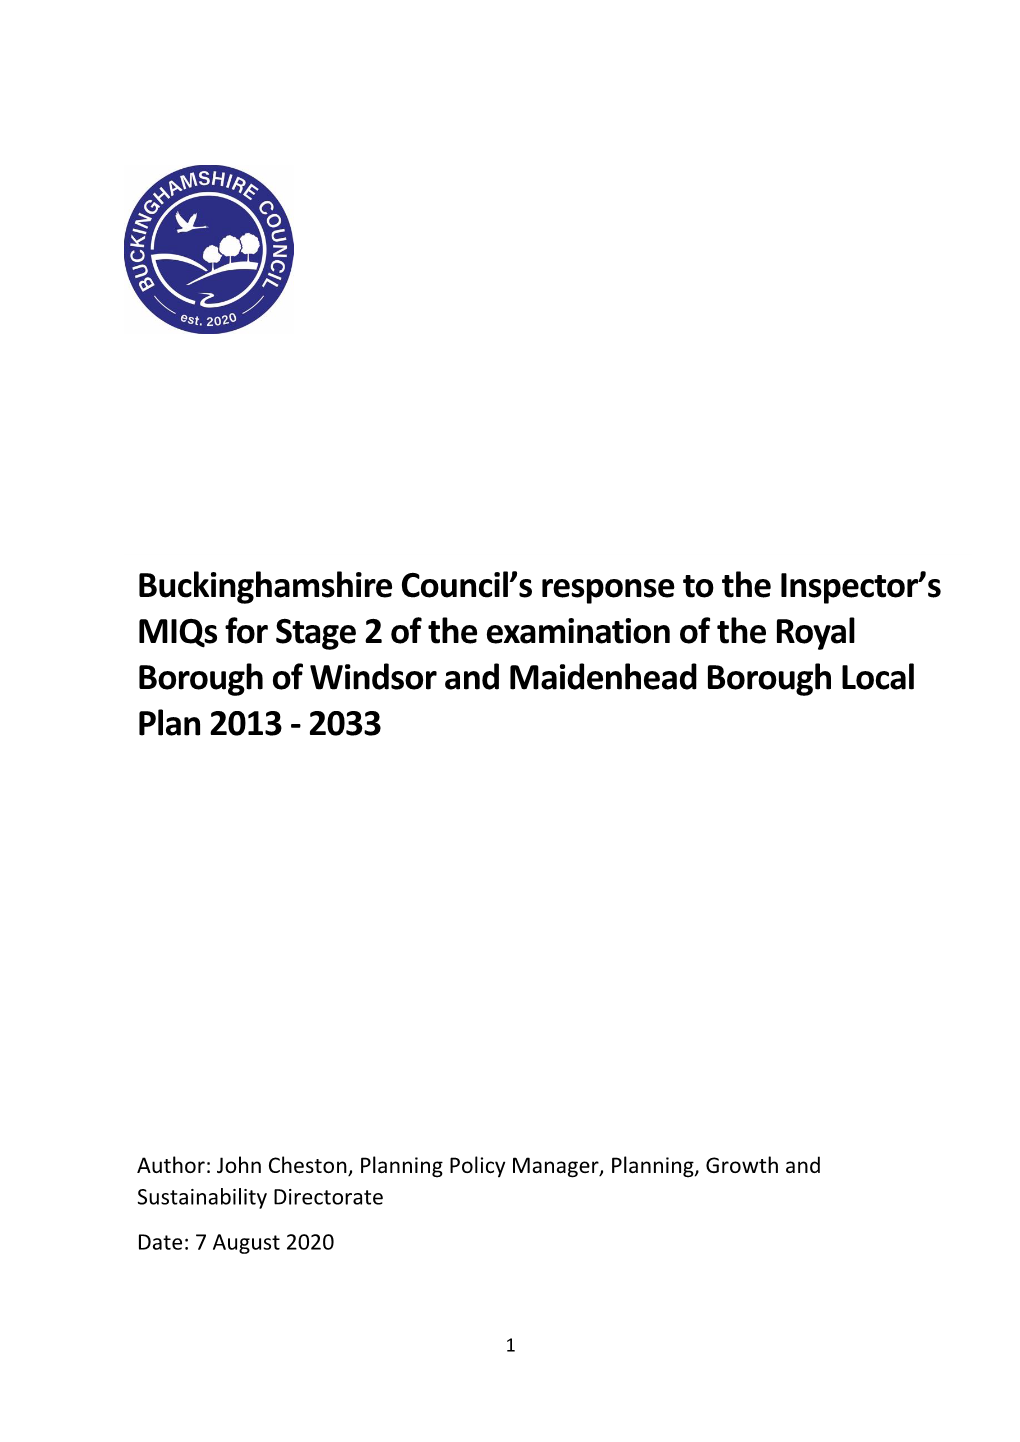 Buckinghamshire Council's Response to the Inspector's Miqs for Stage of the Examination of the Royal Borough of Windsor